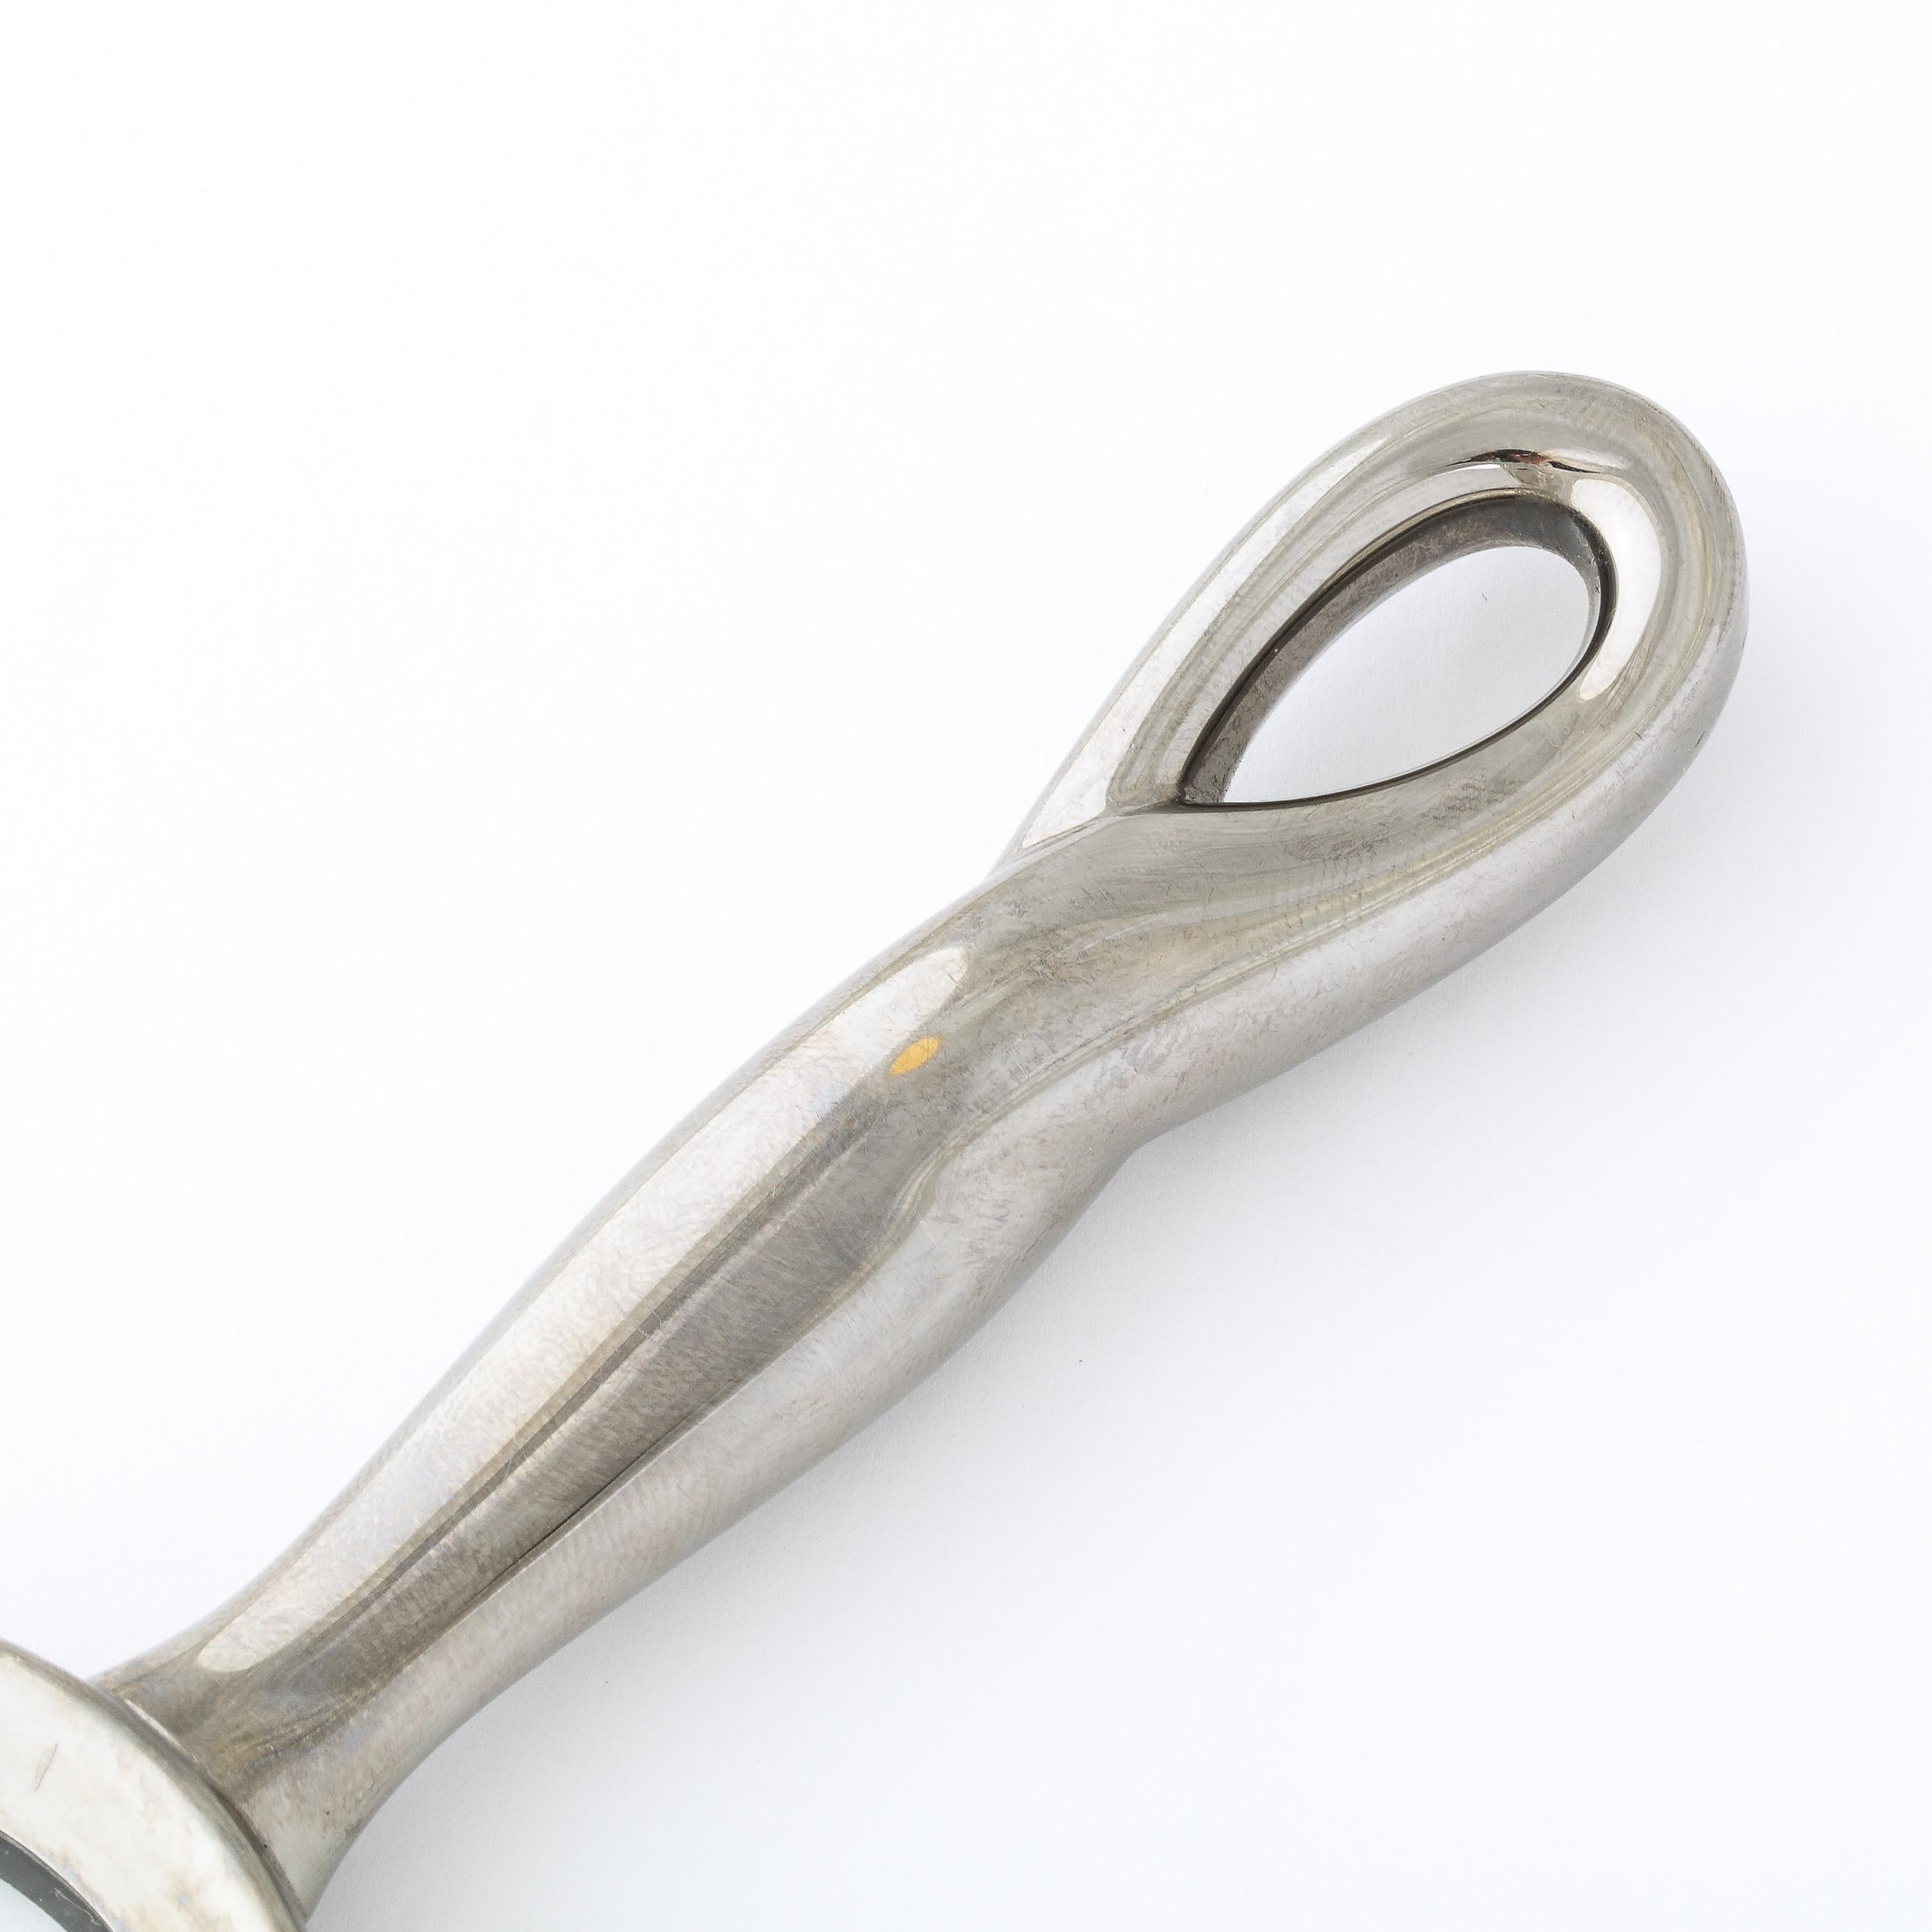 Modernist Magnifying Glass in Gunmetal by Elsa Perretti for Tiffany and Co 1